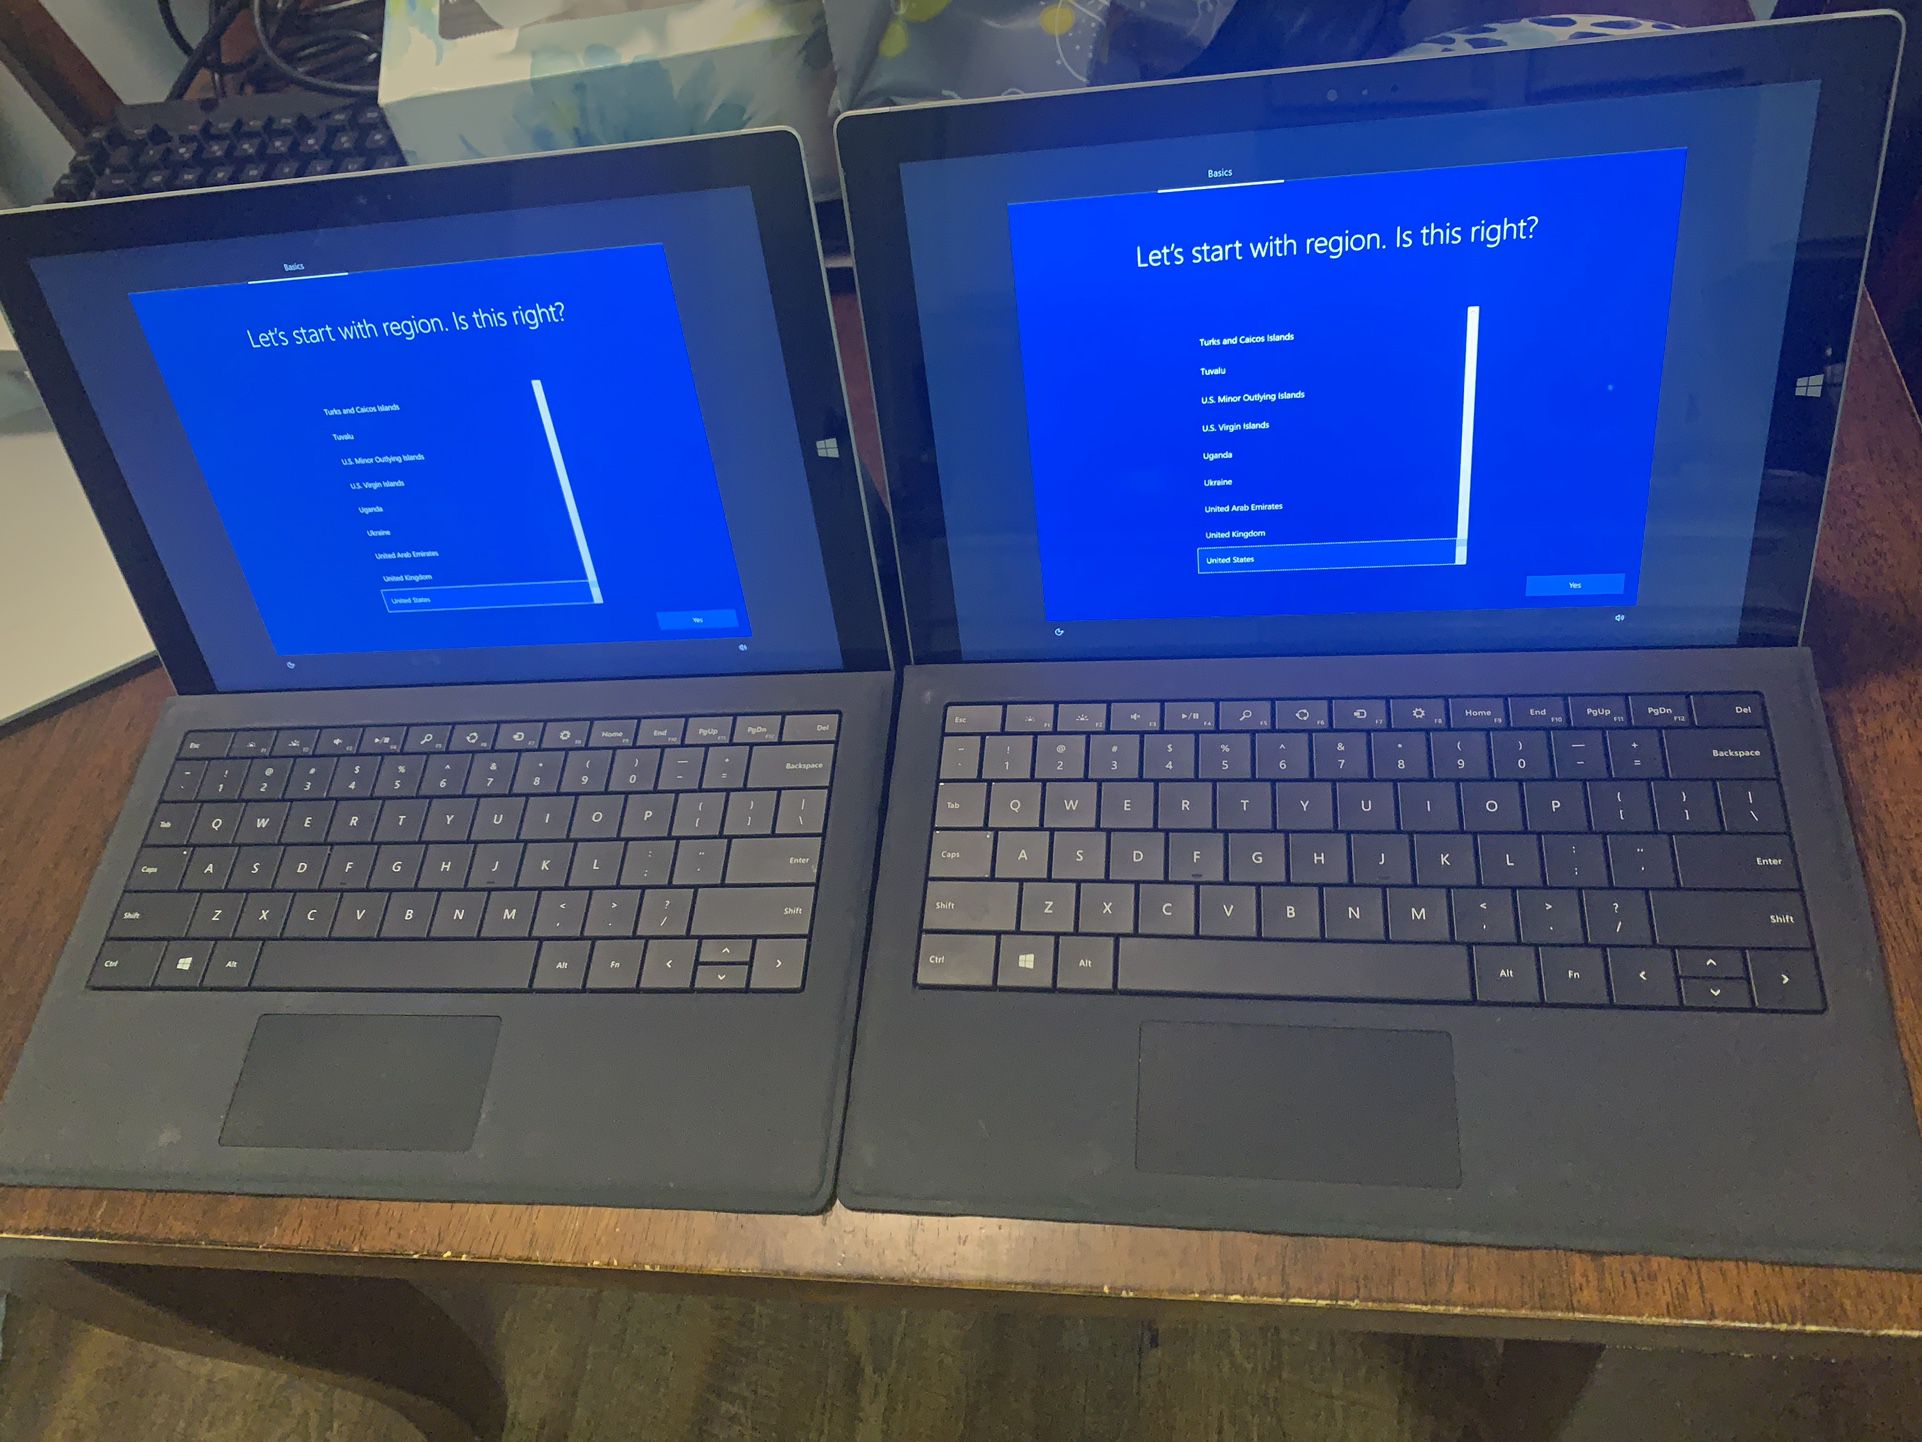 Surface Pro 3 Tablet PCs (2 Available)